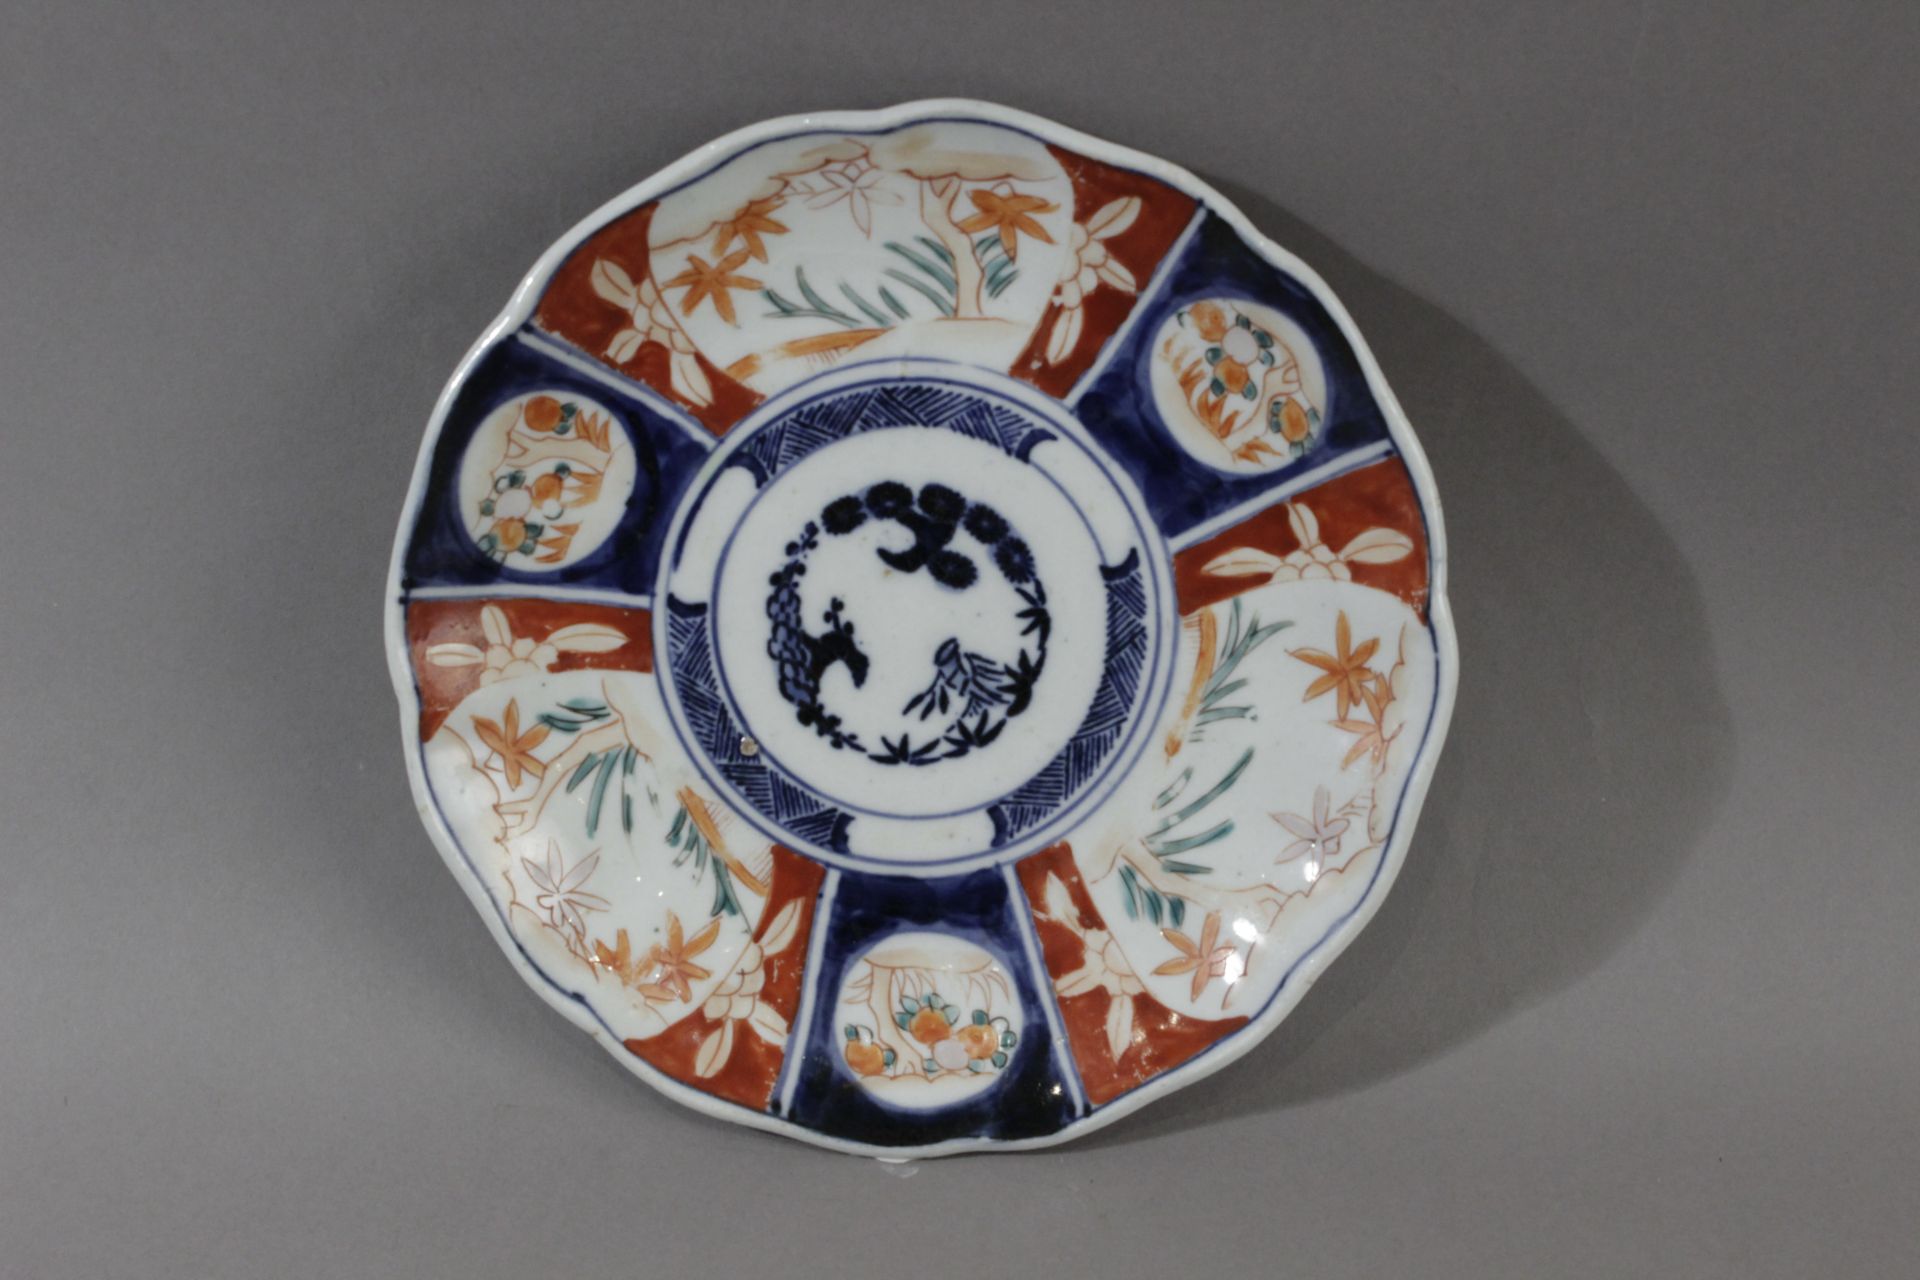 A 19th century Chinese dish in Imari porcelain